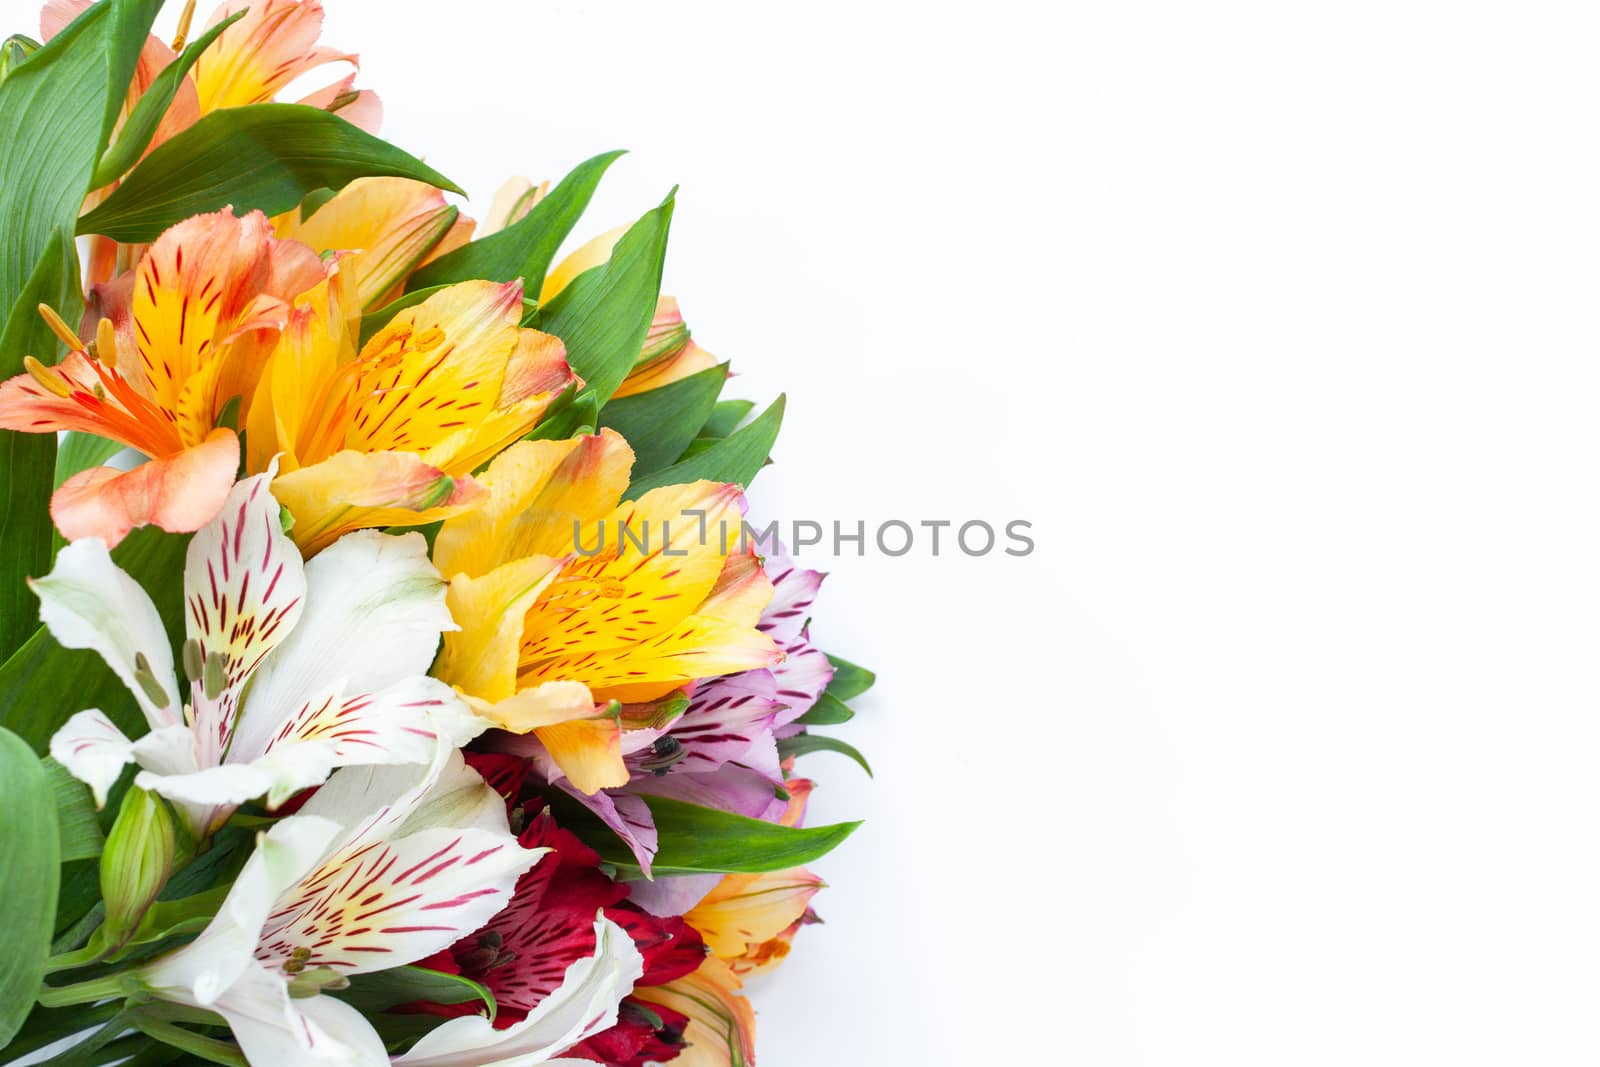 Bouquet of colorful flowers alstroemeria on white background. Flat lay. Horizontal. Mockup with copy space for greeting card, social media, flower delivery, Mother's day, Women's Day